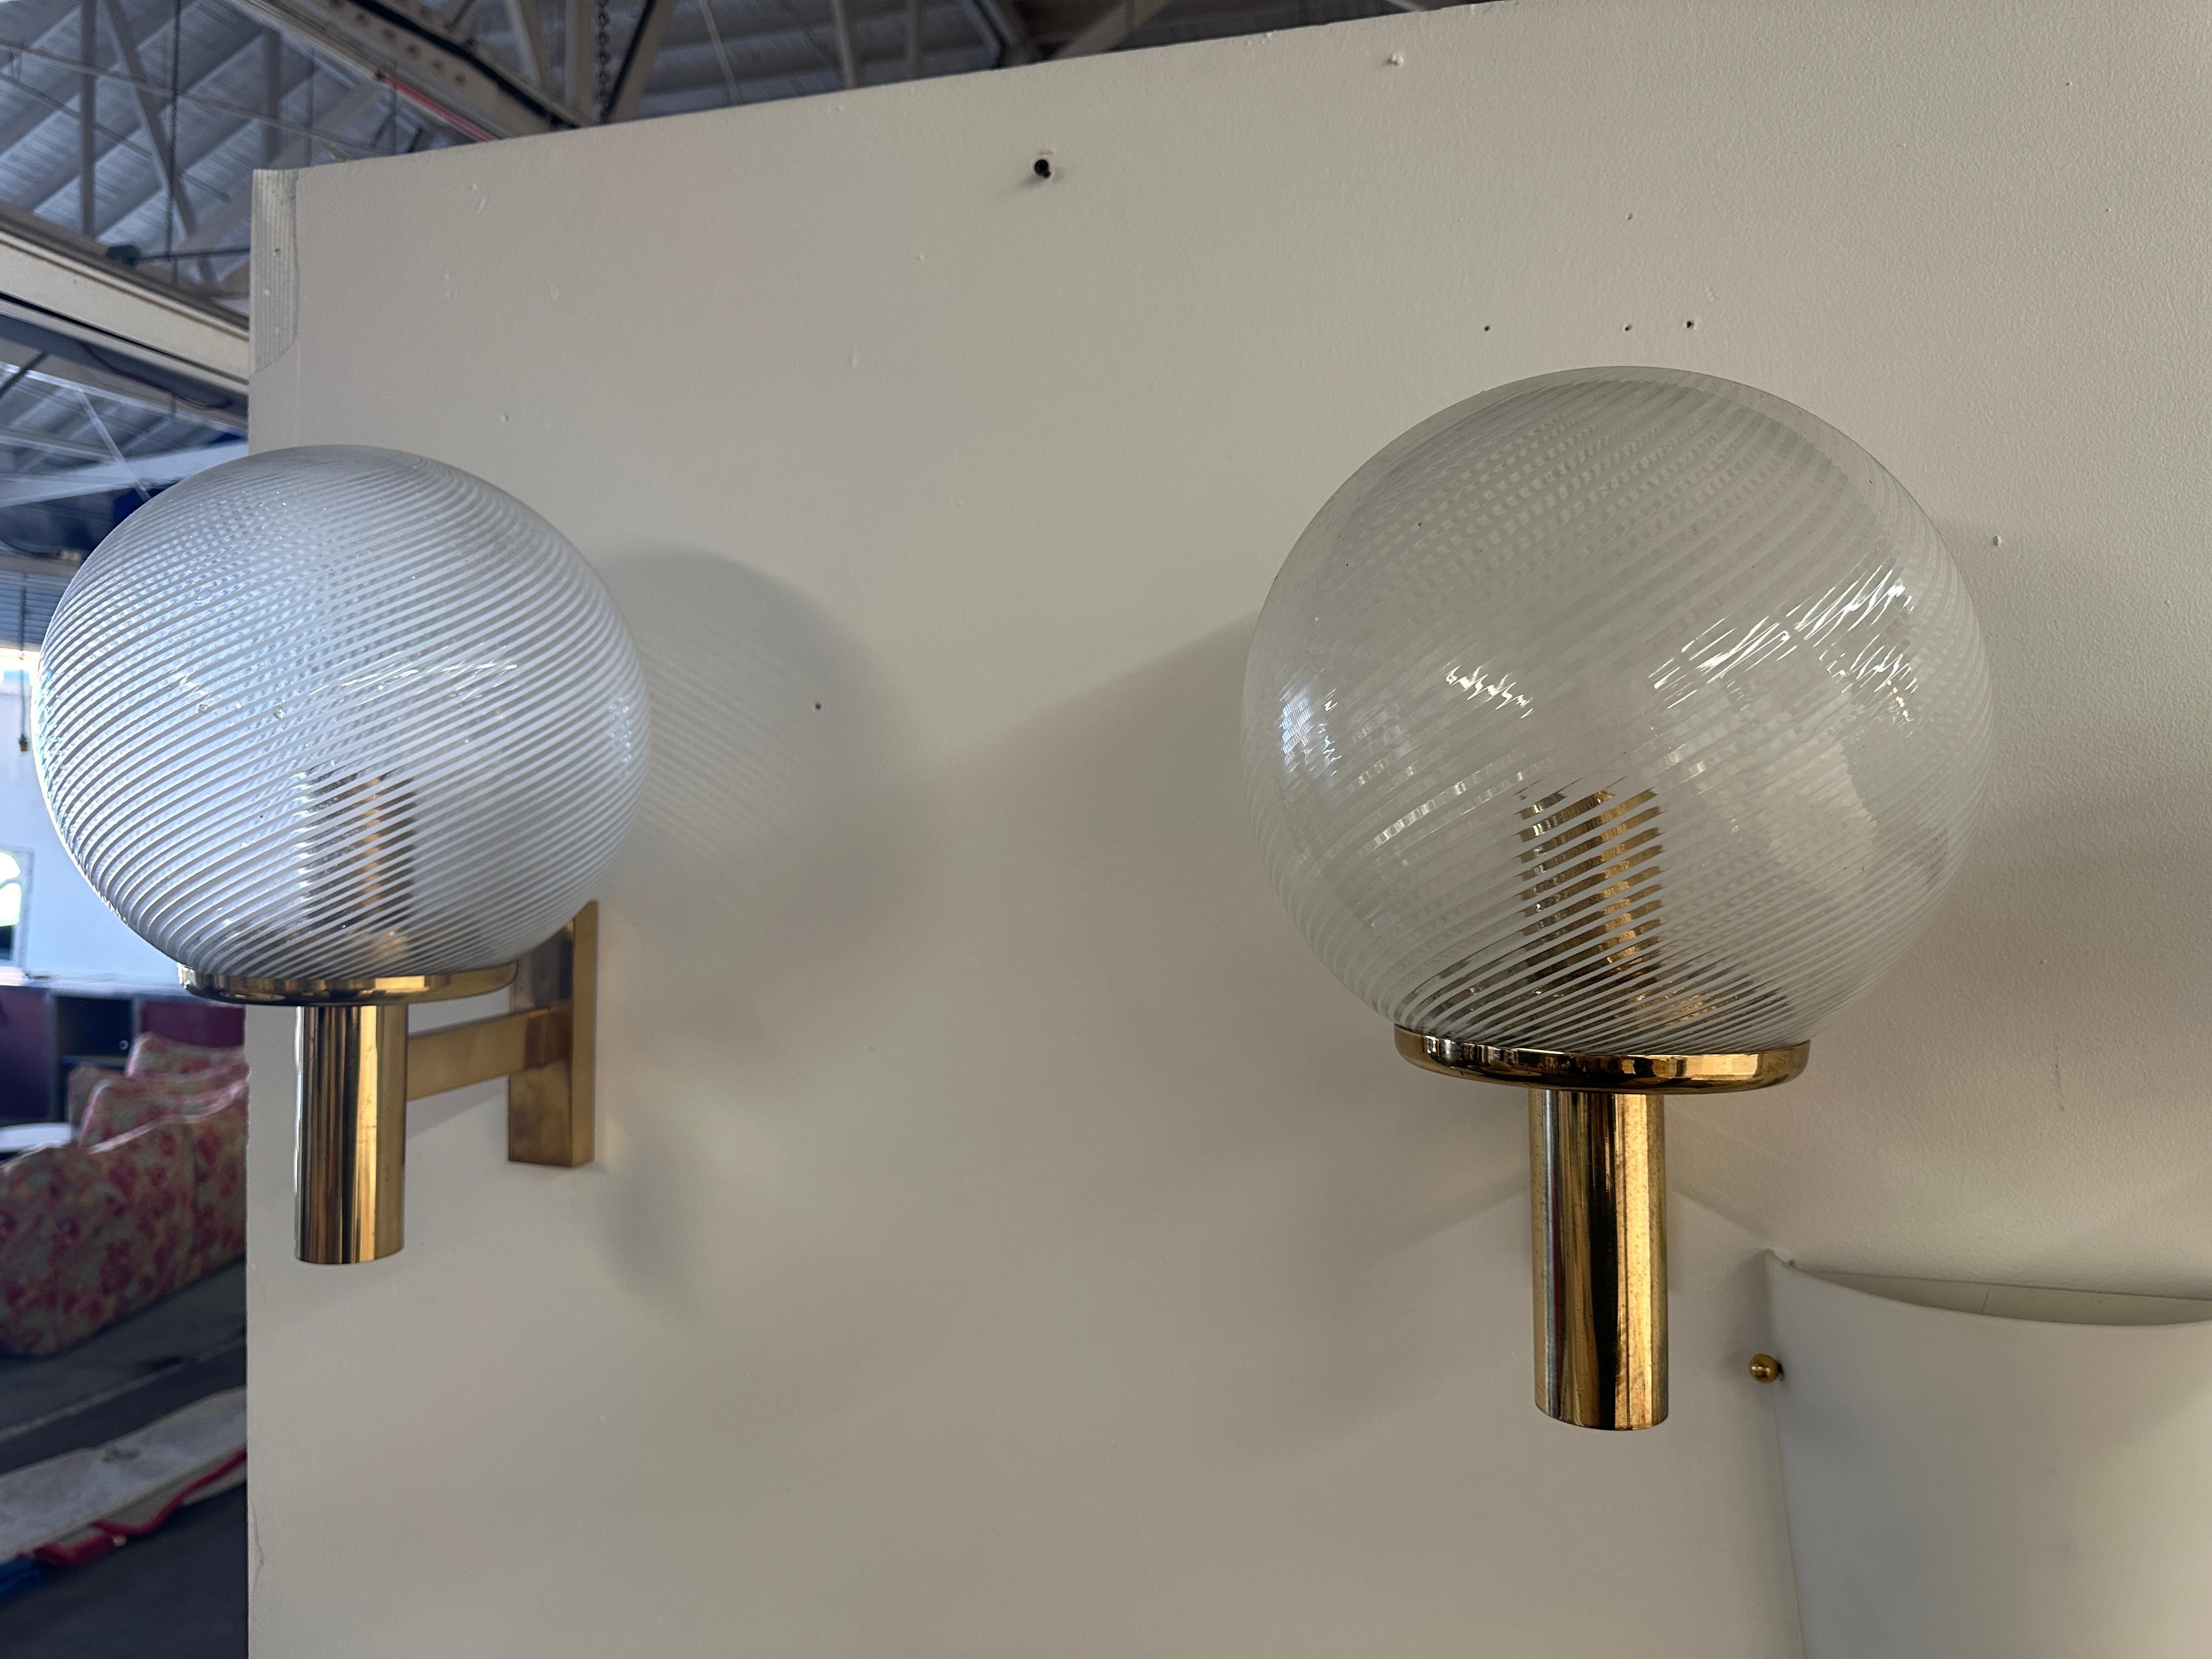 The Pair of 2 Mid Century Italian Wall Sconces from the 1970s exude a timeless and elegant design. Featuring a fully brass frame, these wall sconces capture the essence of mid-century aesthetics with their sleek and sophisticated appearance. The